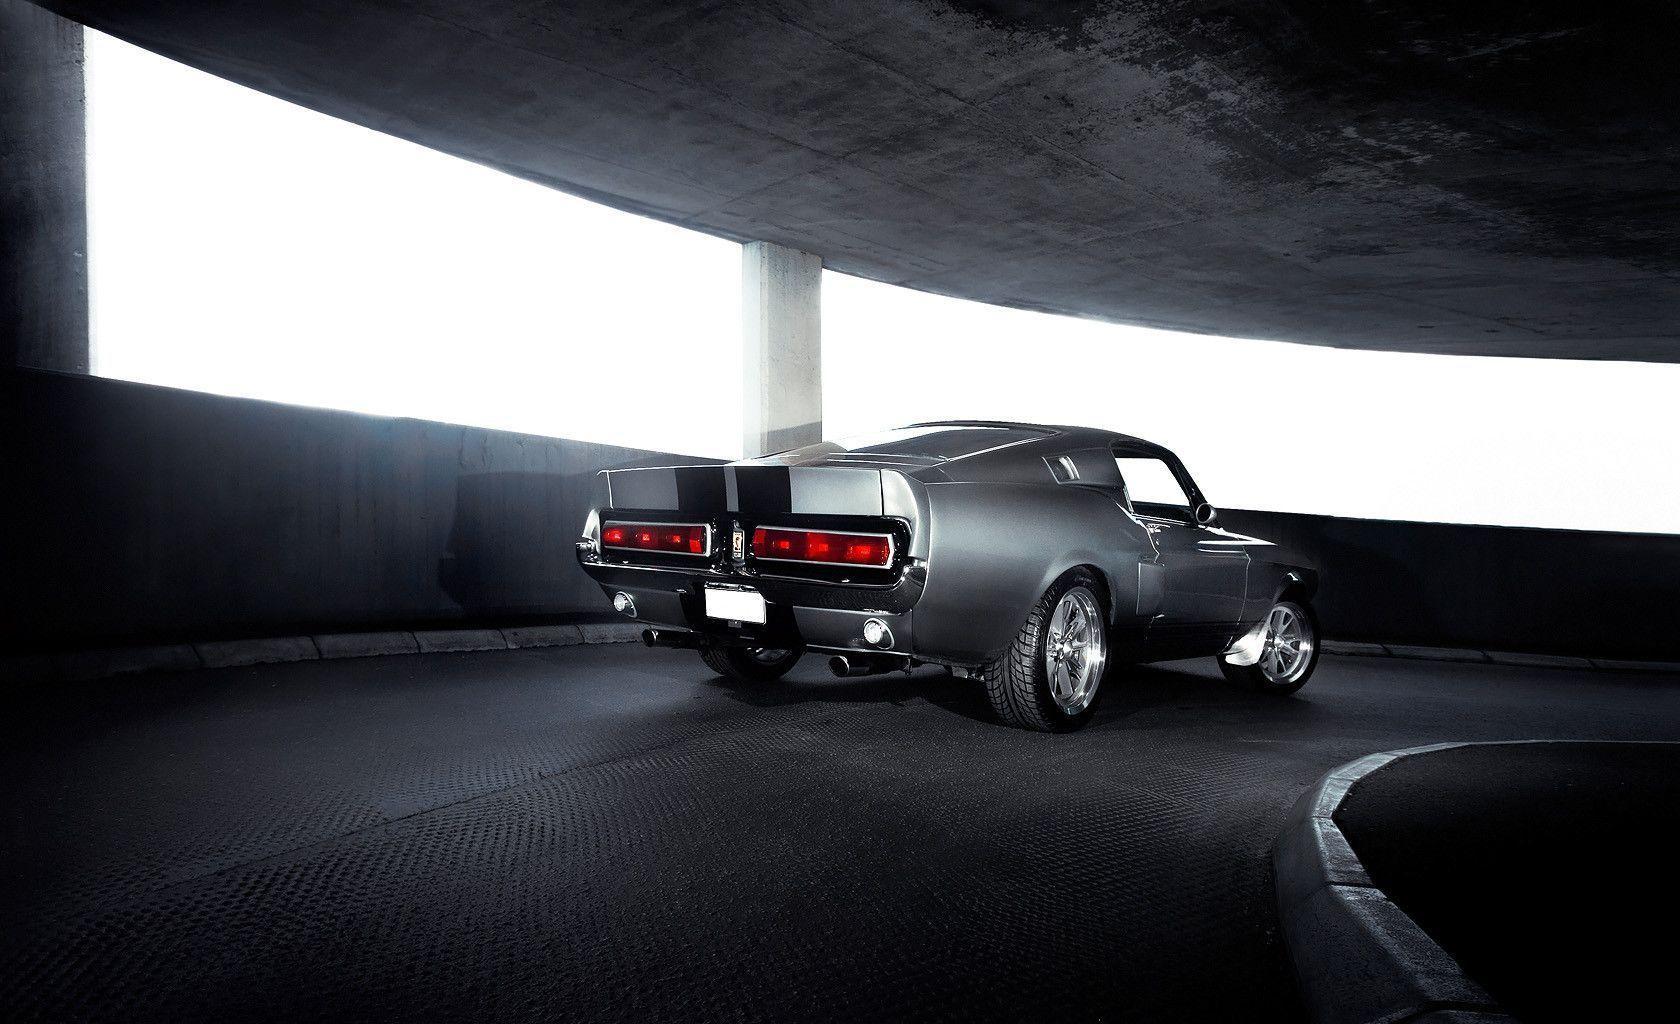 Ford Mustang Gt500 Eleanor » Holy Drift - Shelby Gt500 Eleanor Hd , HD Wallpaper & Backgrounds